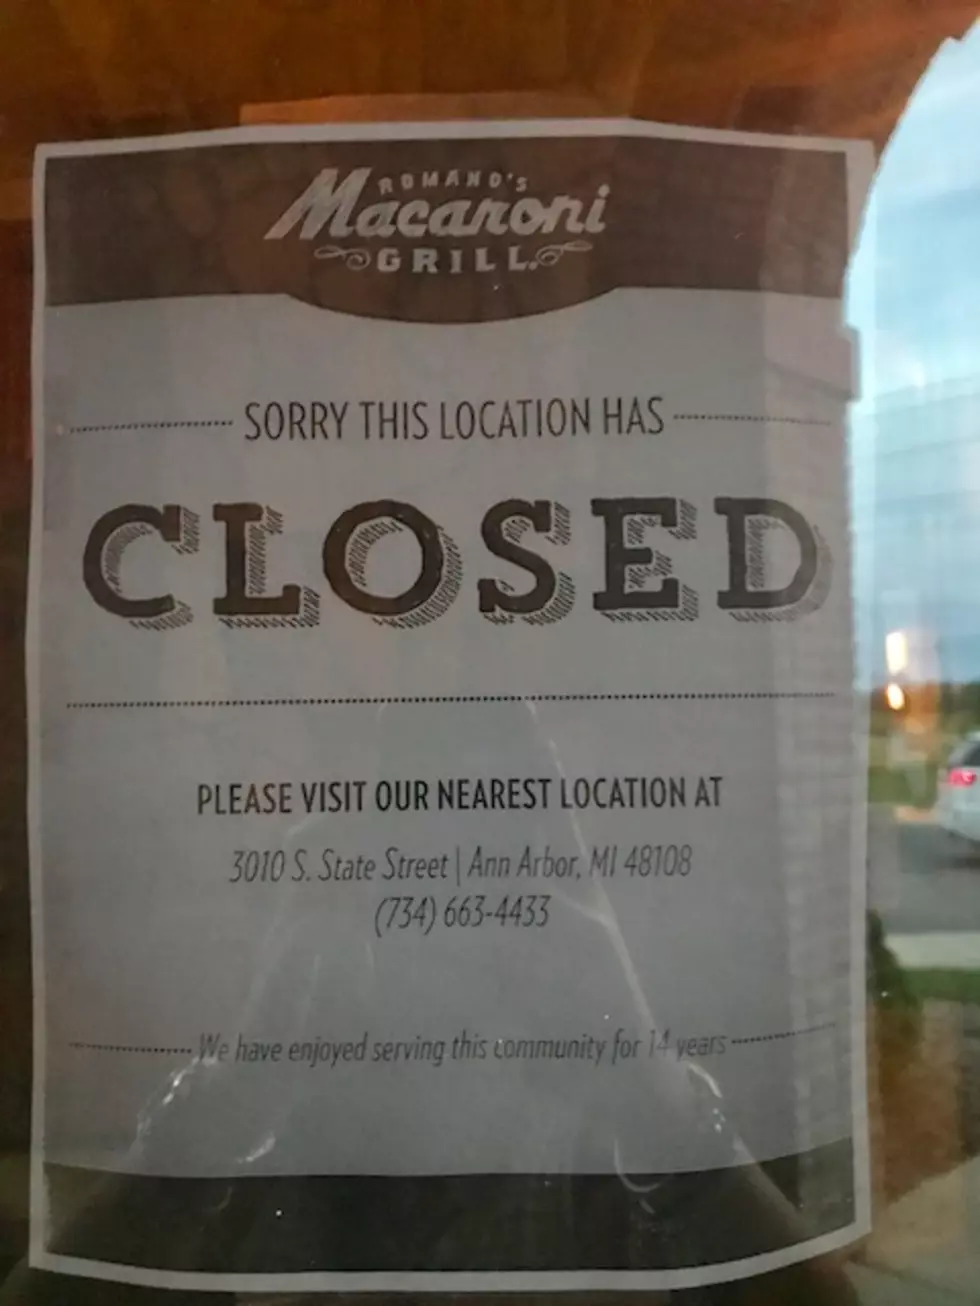 ANOTHER Restaurant in Grand Rapids Has Closed!